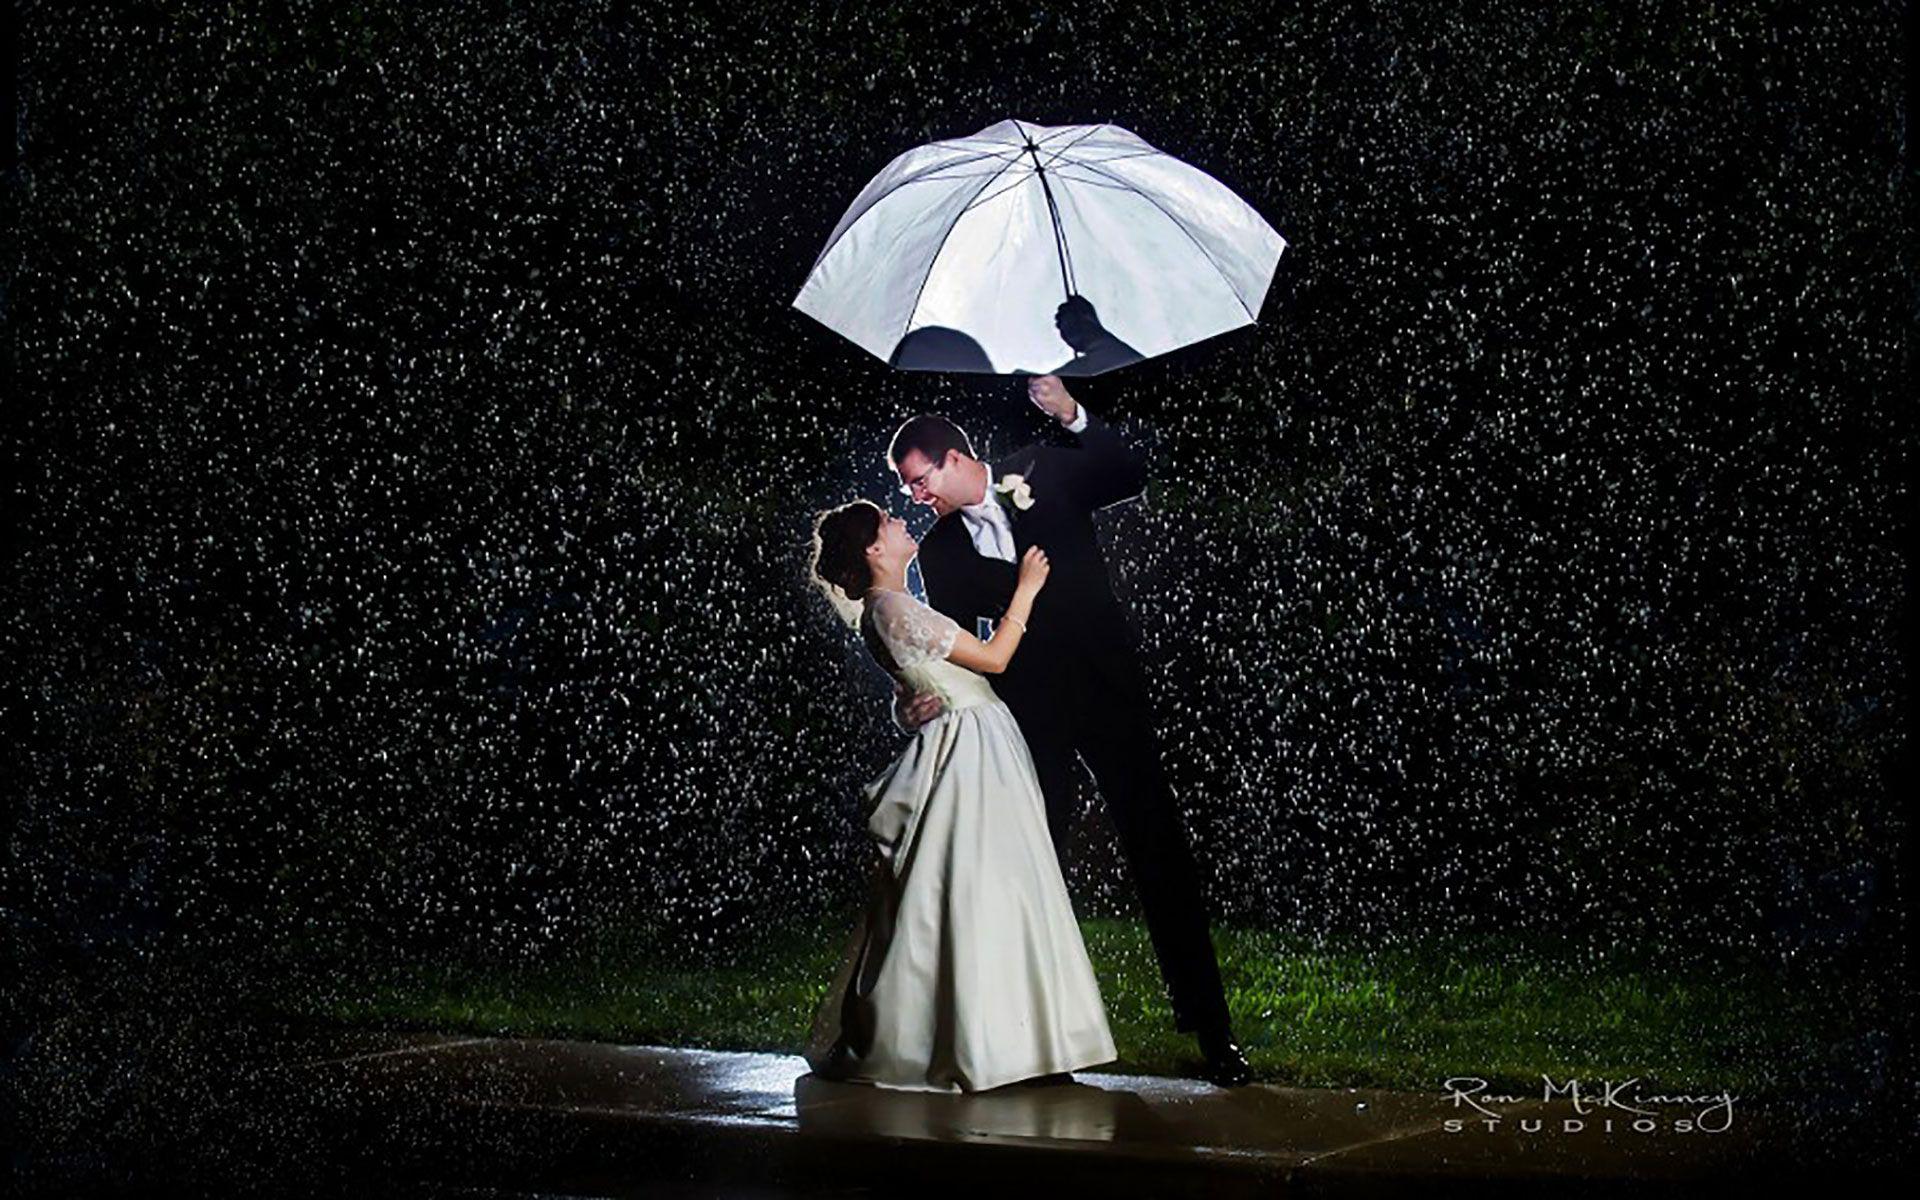 Wallpapers Of Love And Romance In Rain Wallpaper Cave.